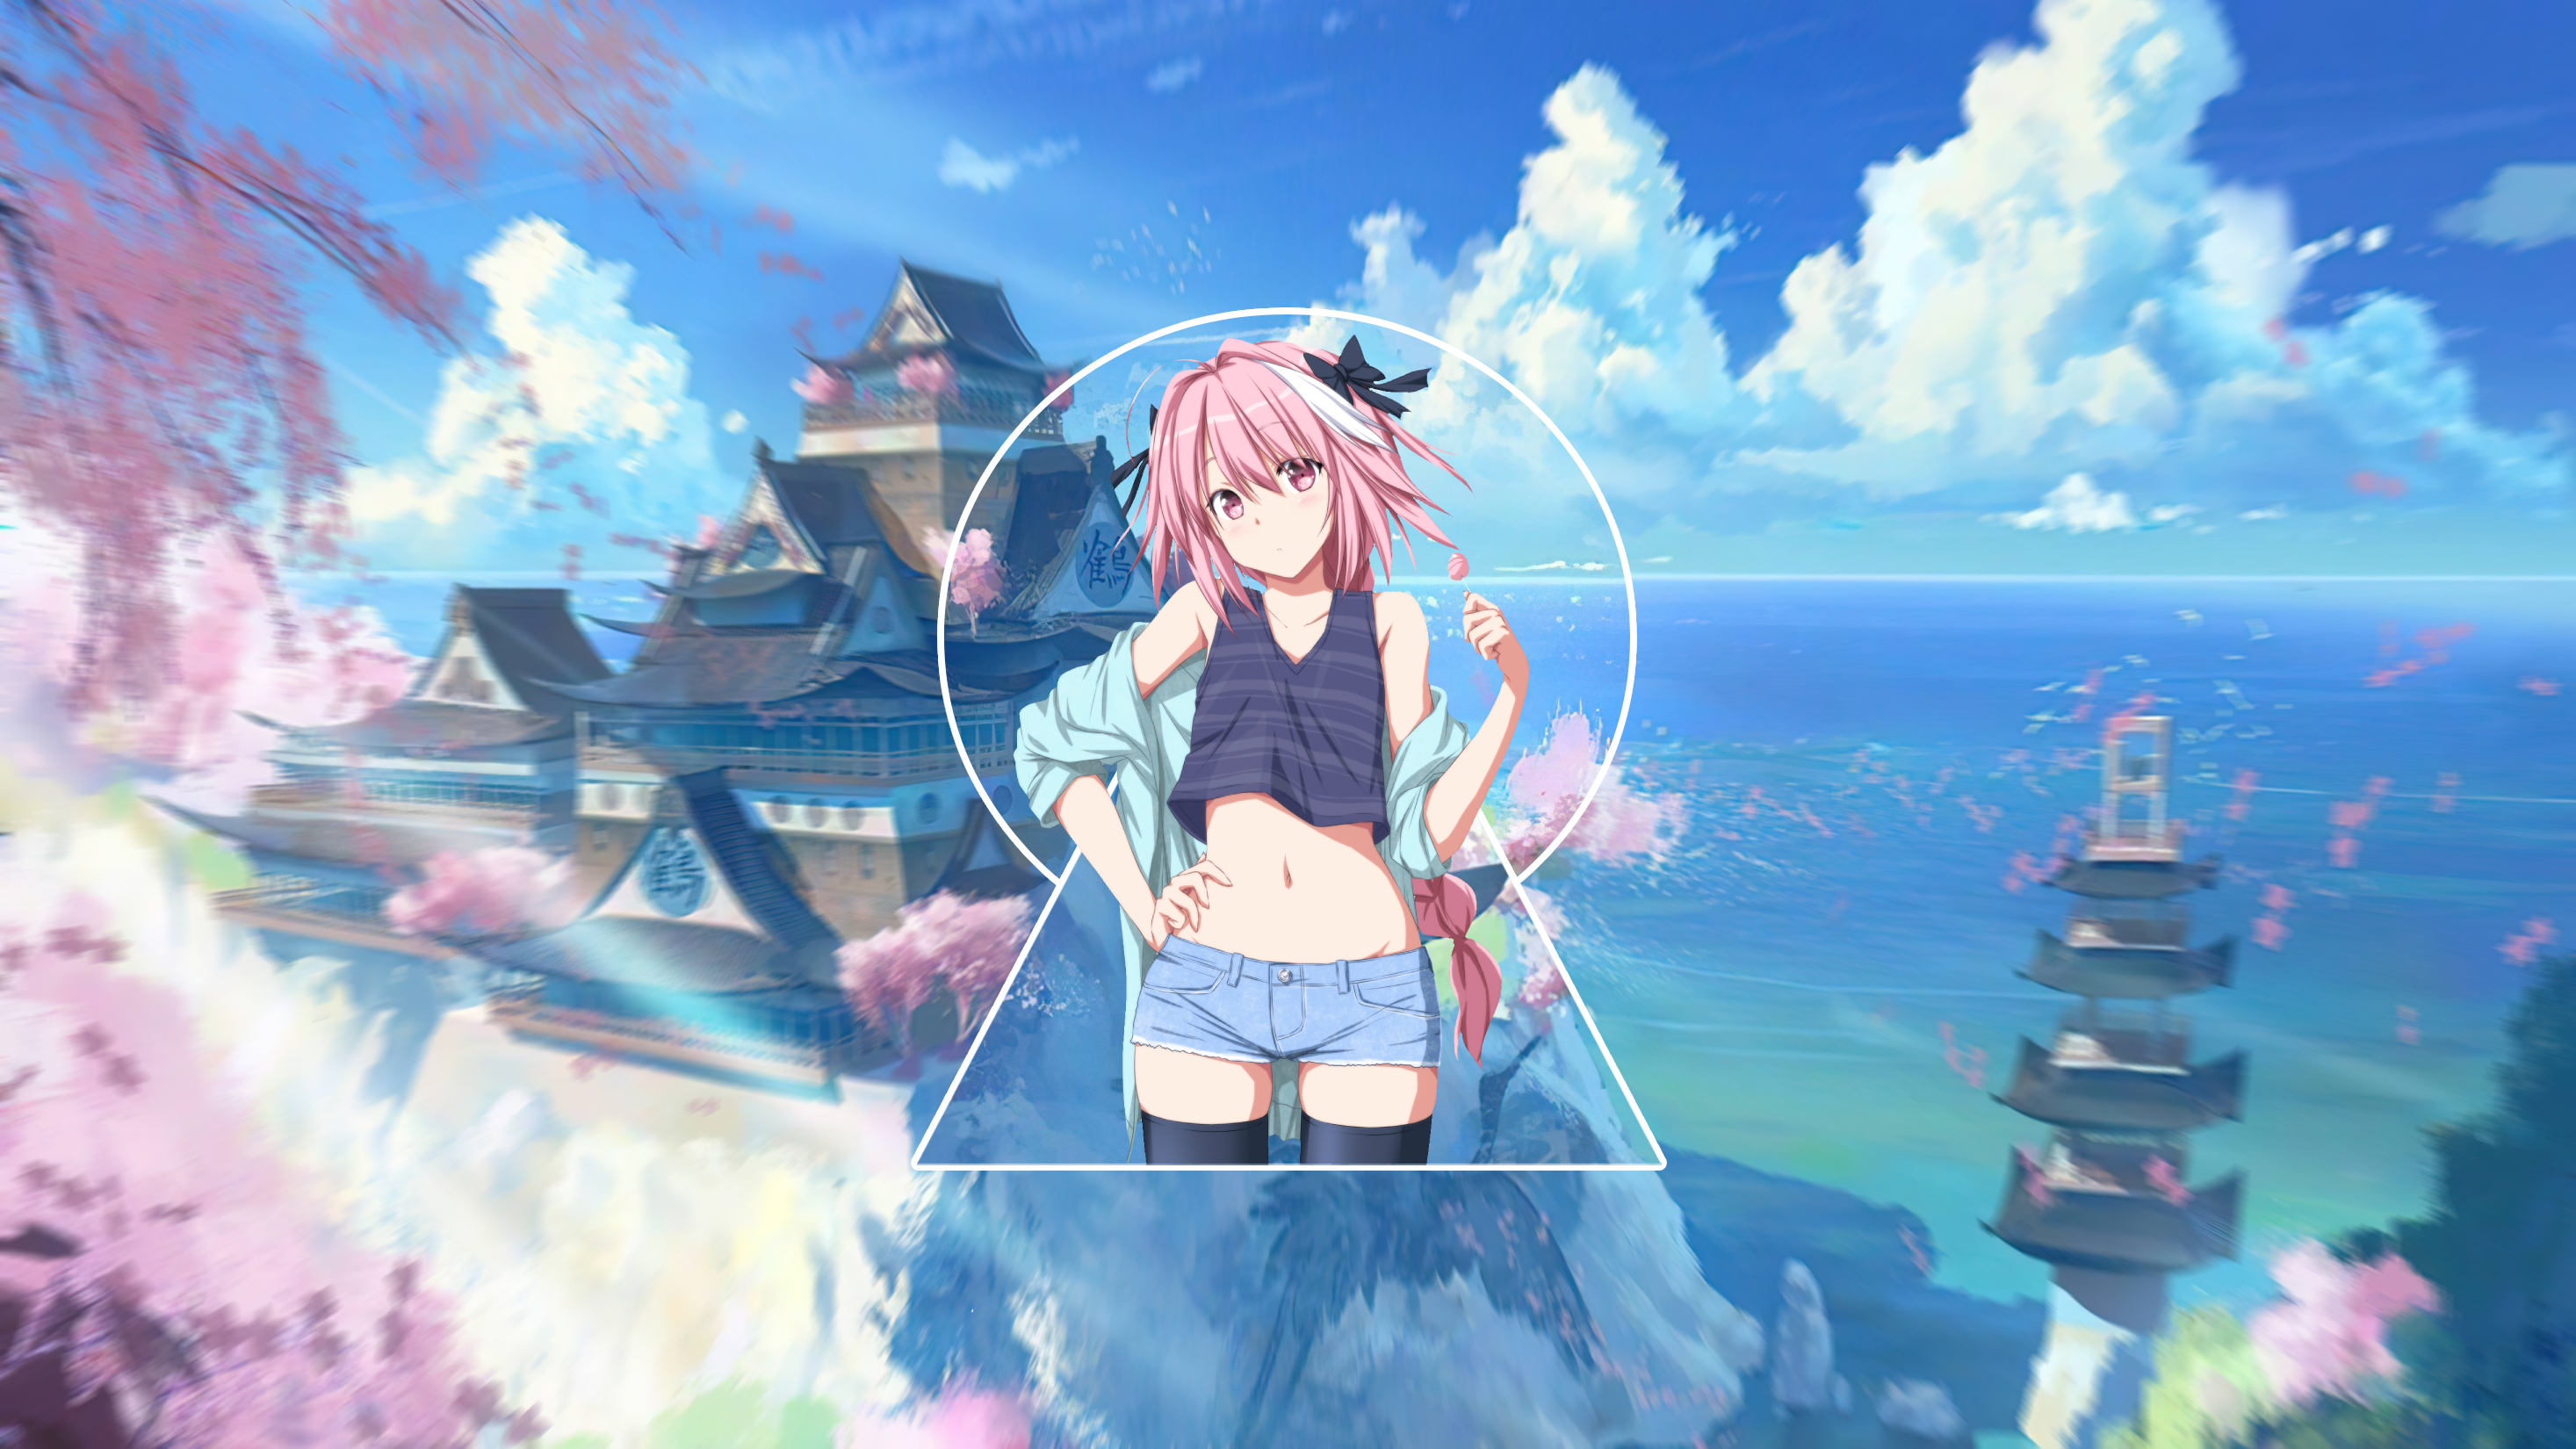 Anime 2933x1650 Astolfo (Fate/Apocrypha) picture-in-picture digital art Fate series femboy